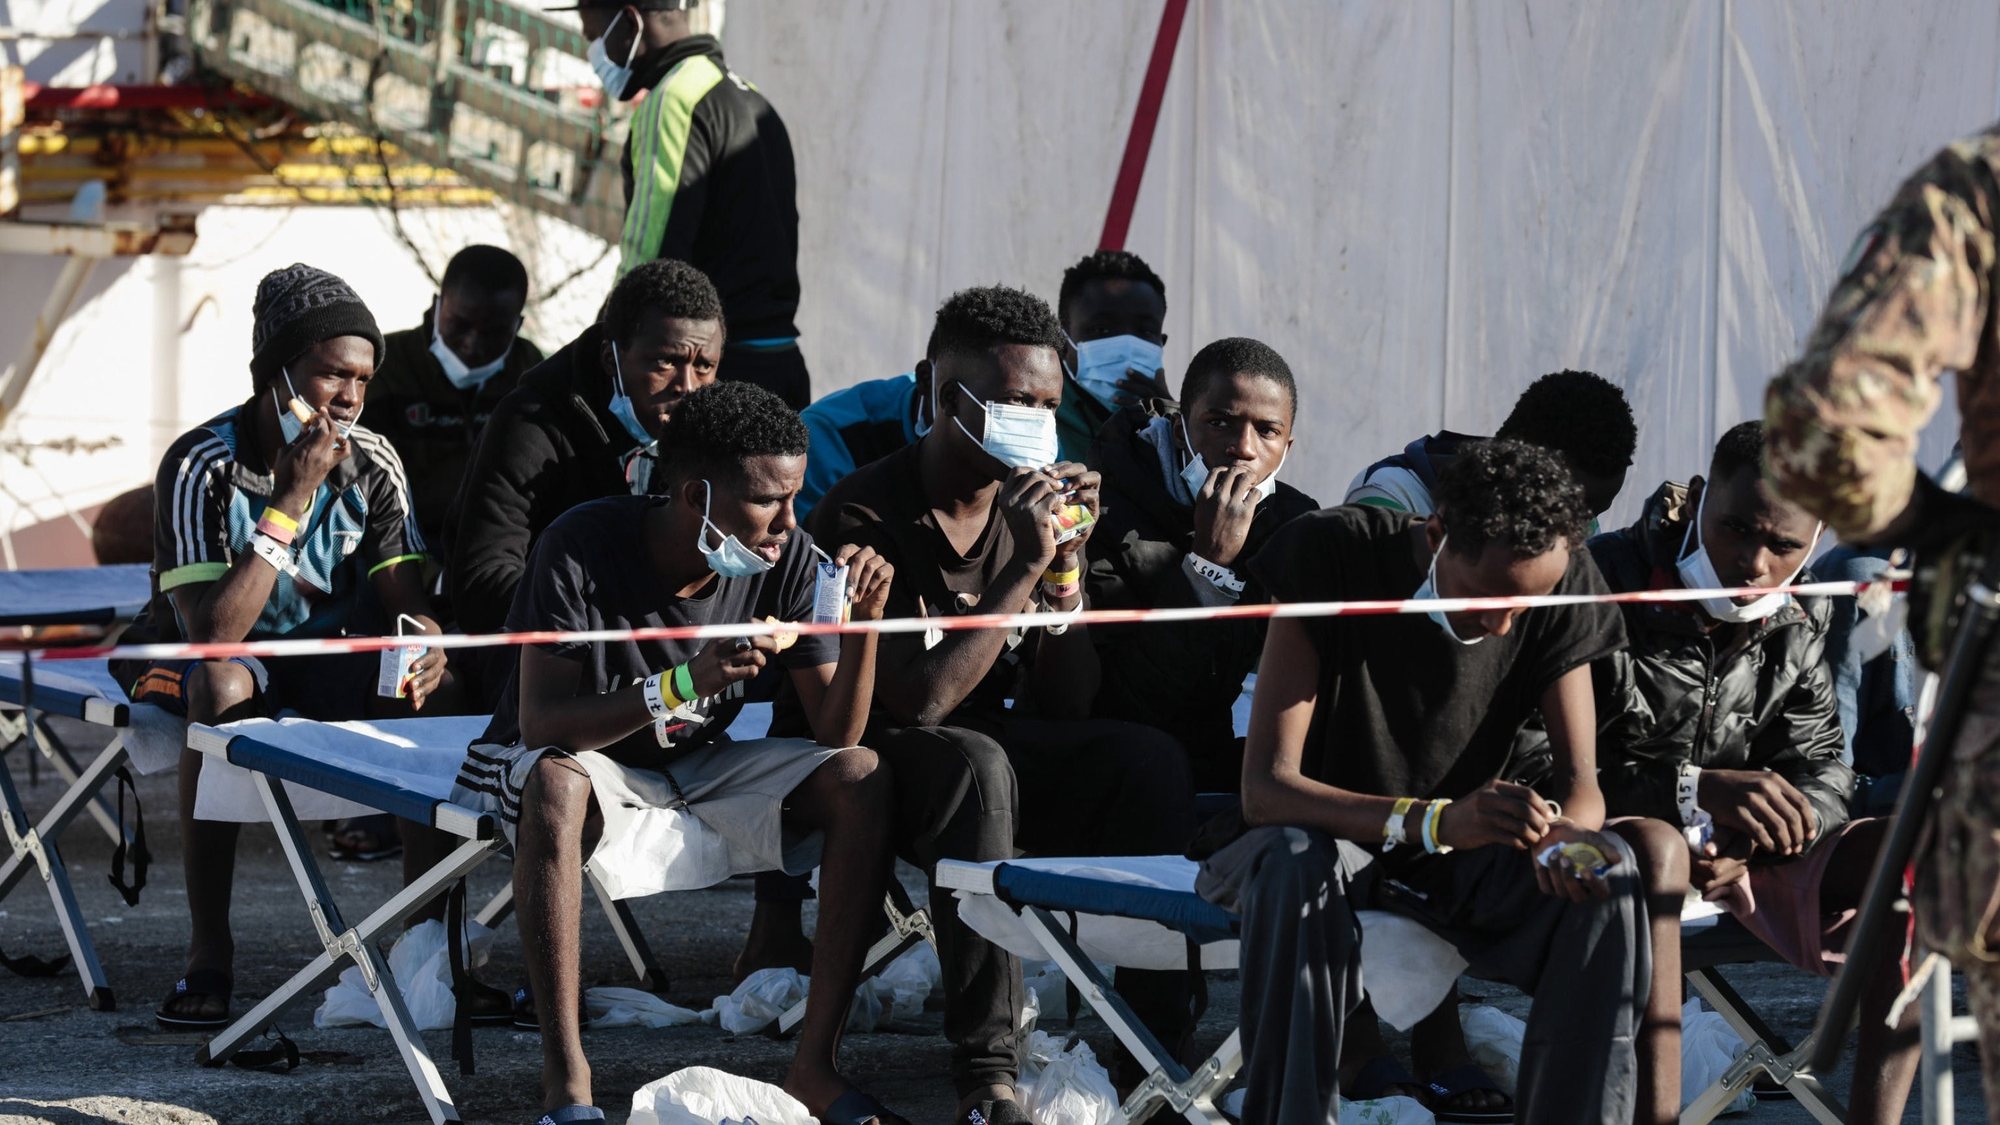 epa09662409 Some of the 440 migrants disembark from &#039;SeaWatch 3&#039; who entered port the previous day, in Pozzallo, Sicily, Italy, 01 January 2022. The German NGO migrant rescue ship Sea Watch 3 with 440 migrants on board arrived on 31 December 2021 in the port of Pozzallo. The ship was at sea since Christmas Eve after carrying out five rescue missions.  EPA/FRANCESCO RUTA